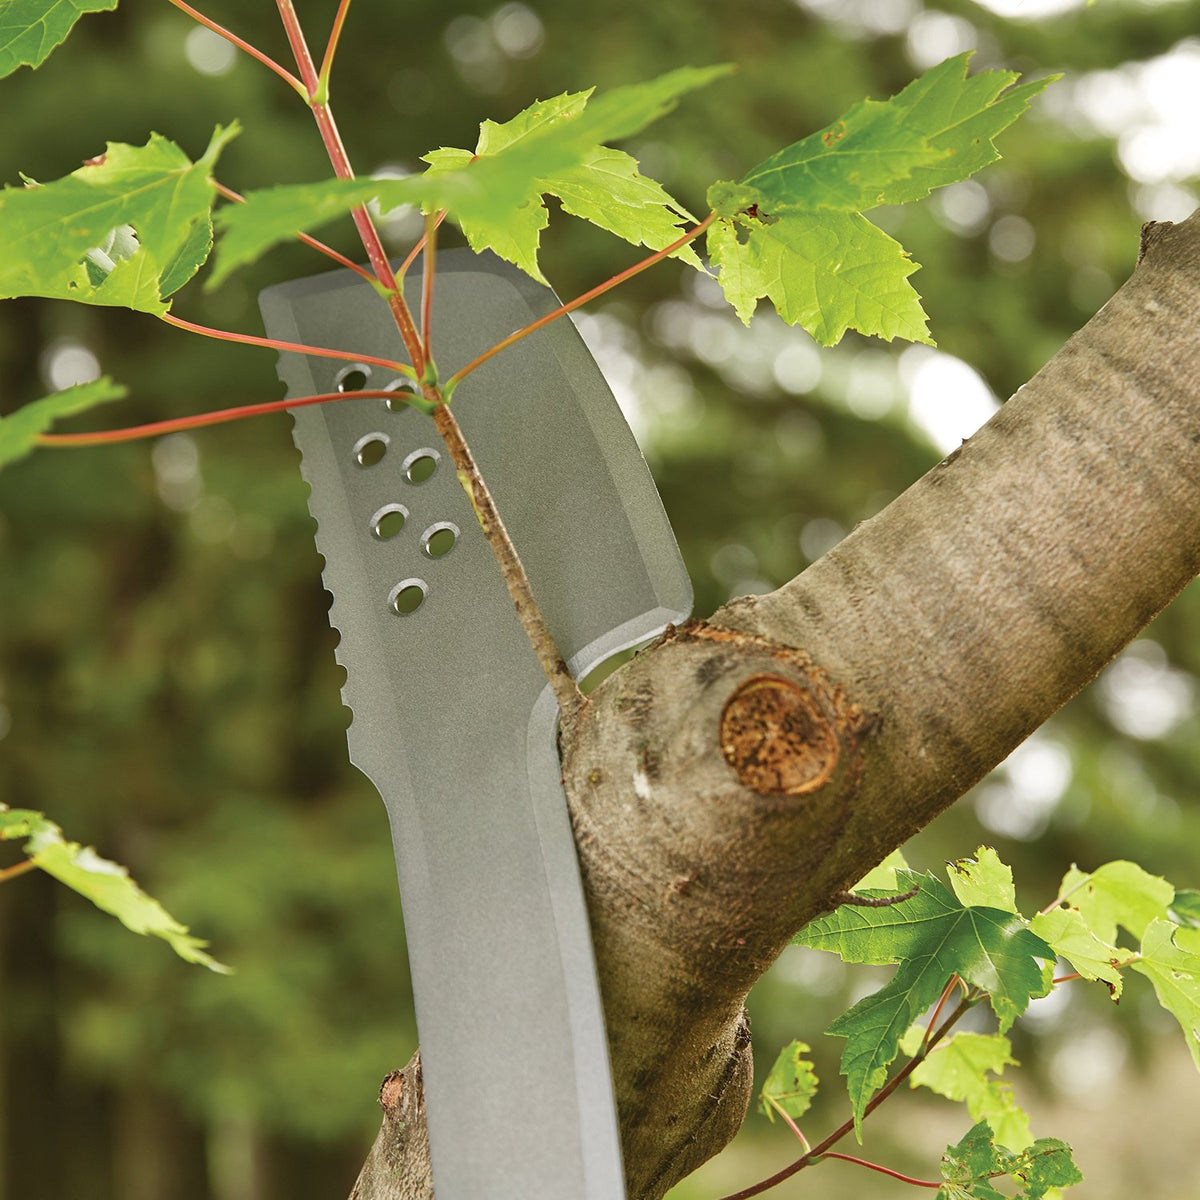 buy machetes & knives at cheap rate in bulk. wholesale & retail lawn & garden equipments store.